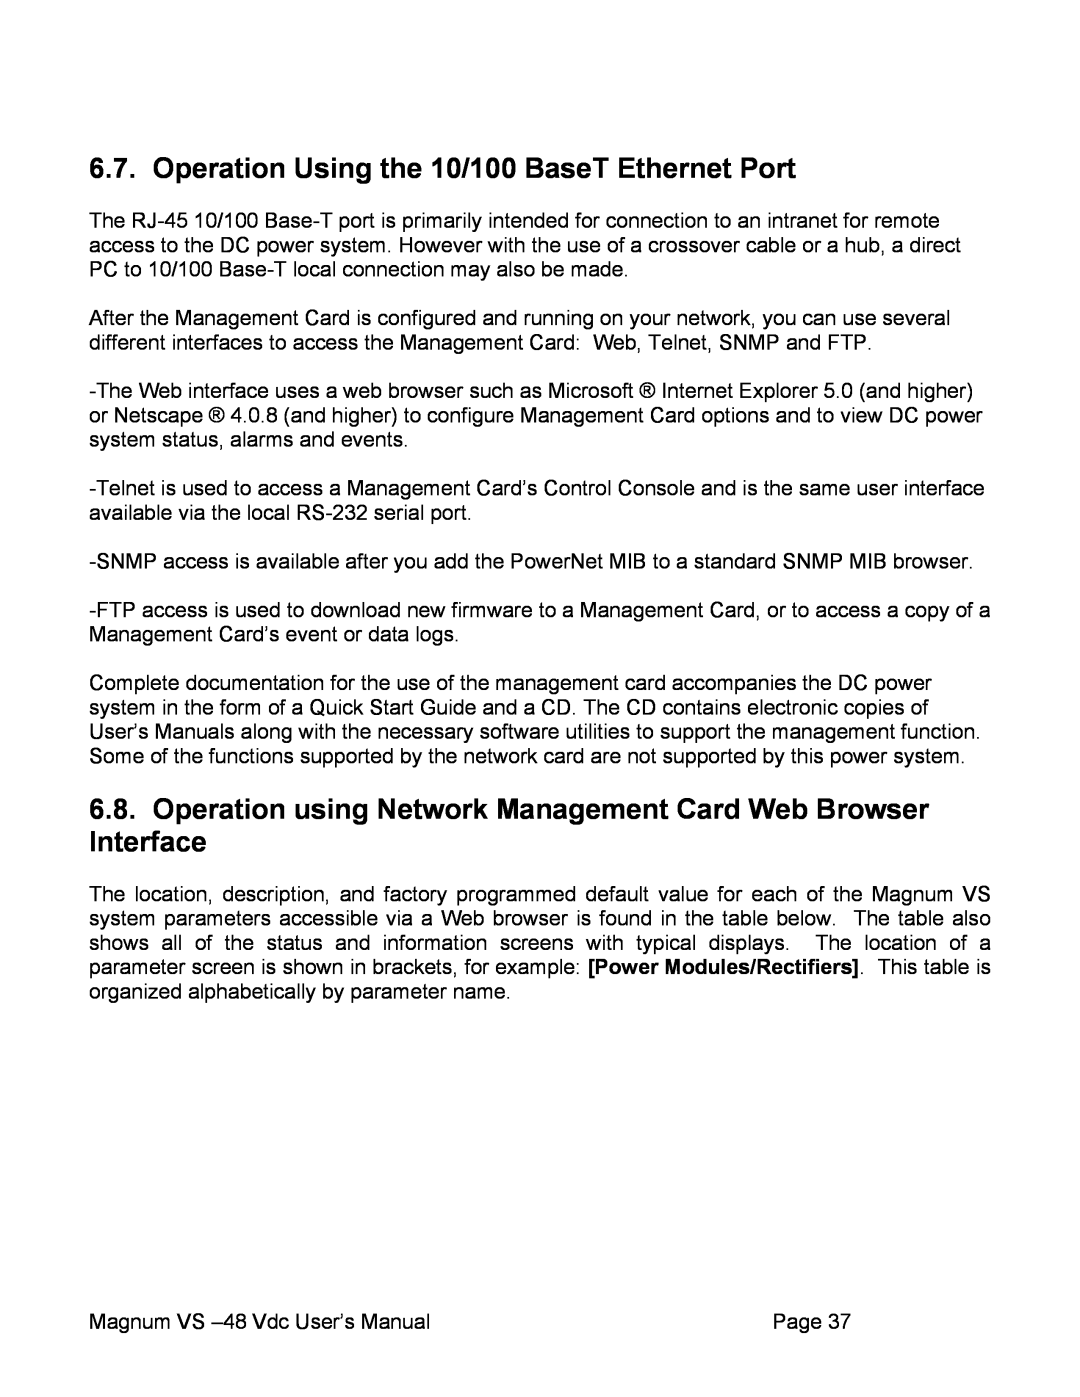 APC VS 100 Operation Using the 10/100 BaseT Ethernet Port, Operation using Network Management Card Web Browser Interface 